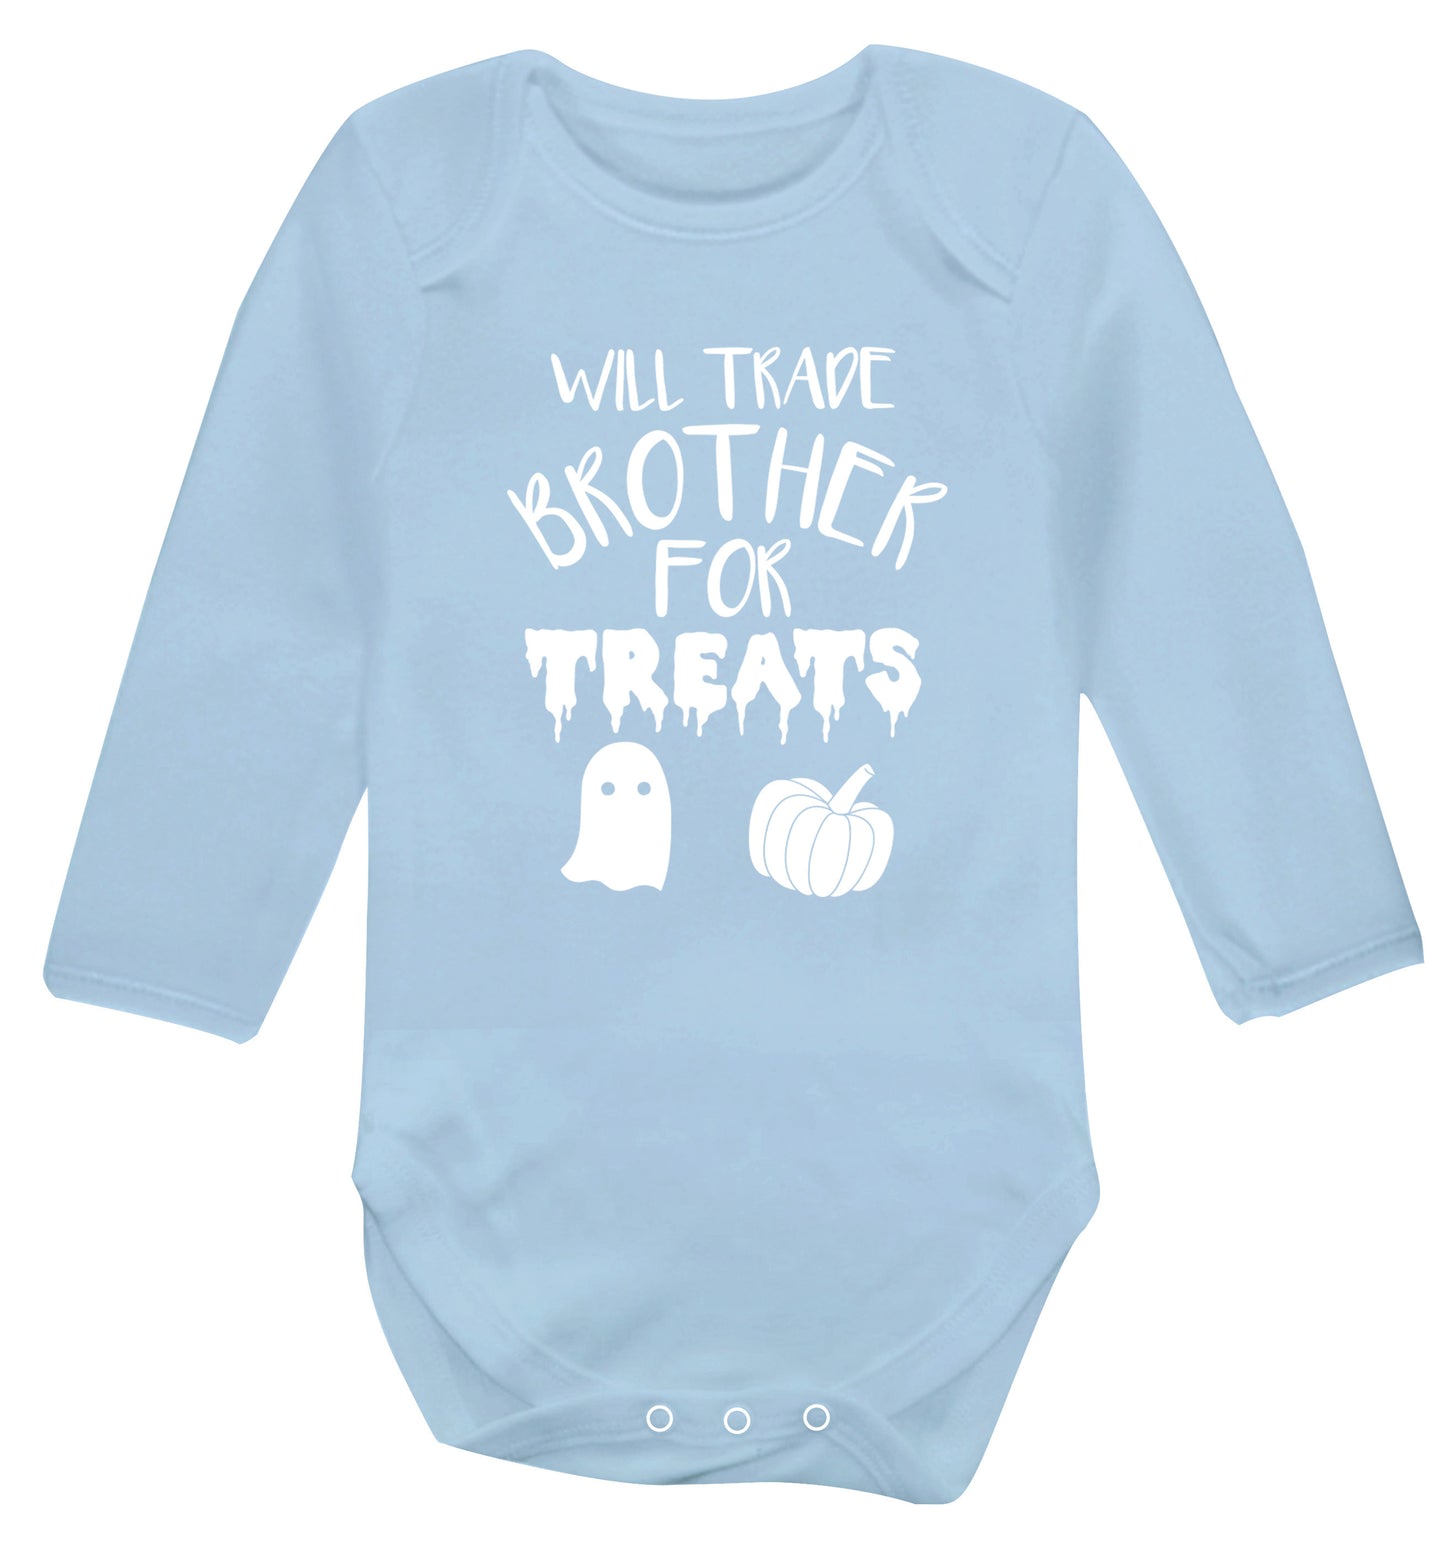 Will trade brother for treats Baby Vest long sleeved pale blue 6-12 months